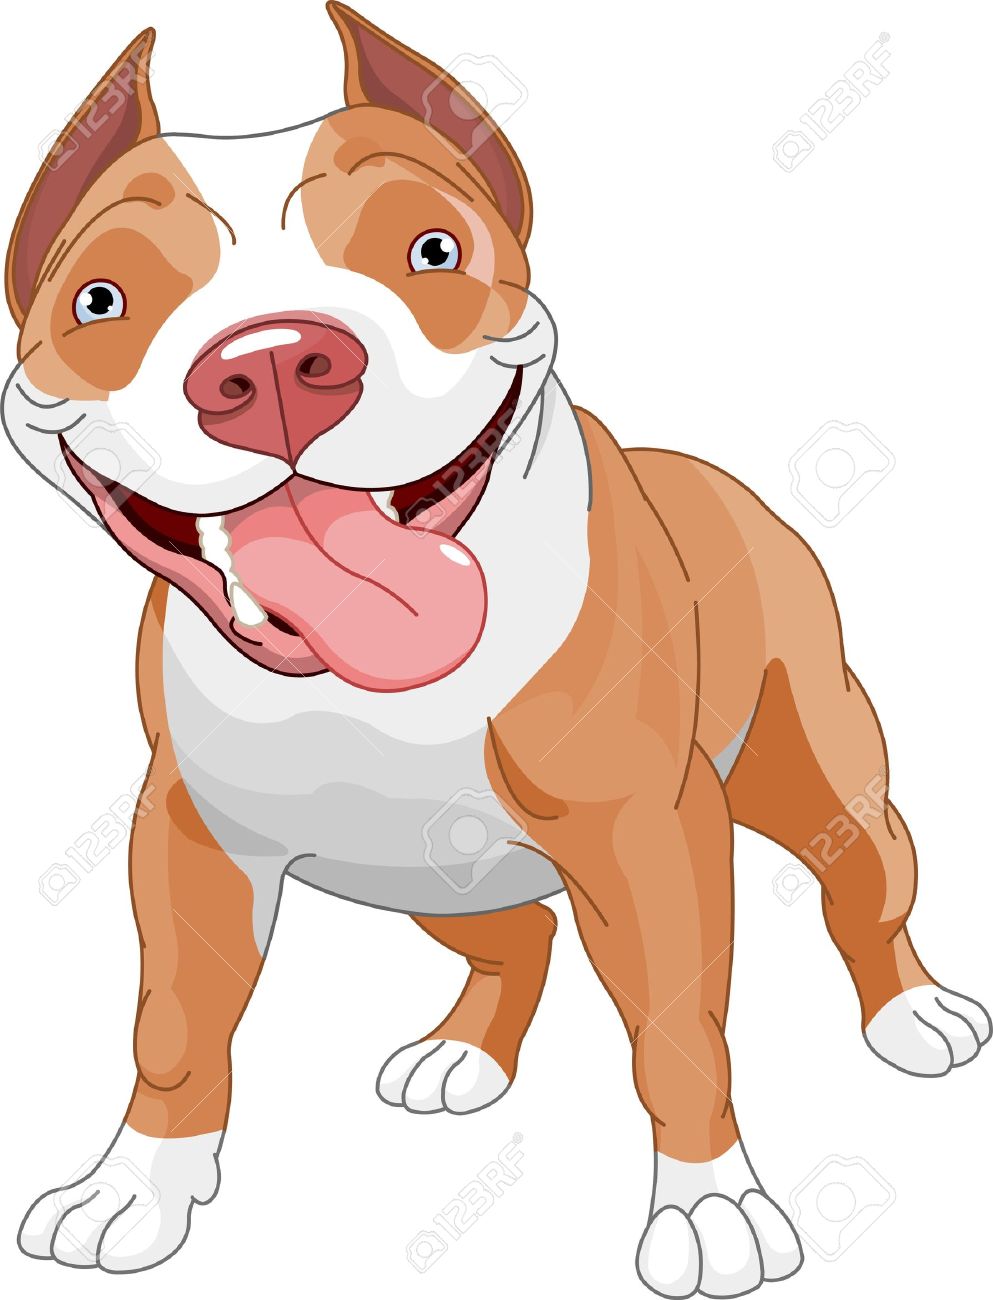 Pitbull Puppy clipart #12, Download drawings